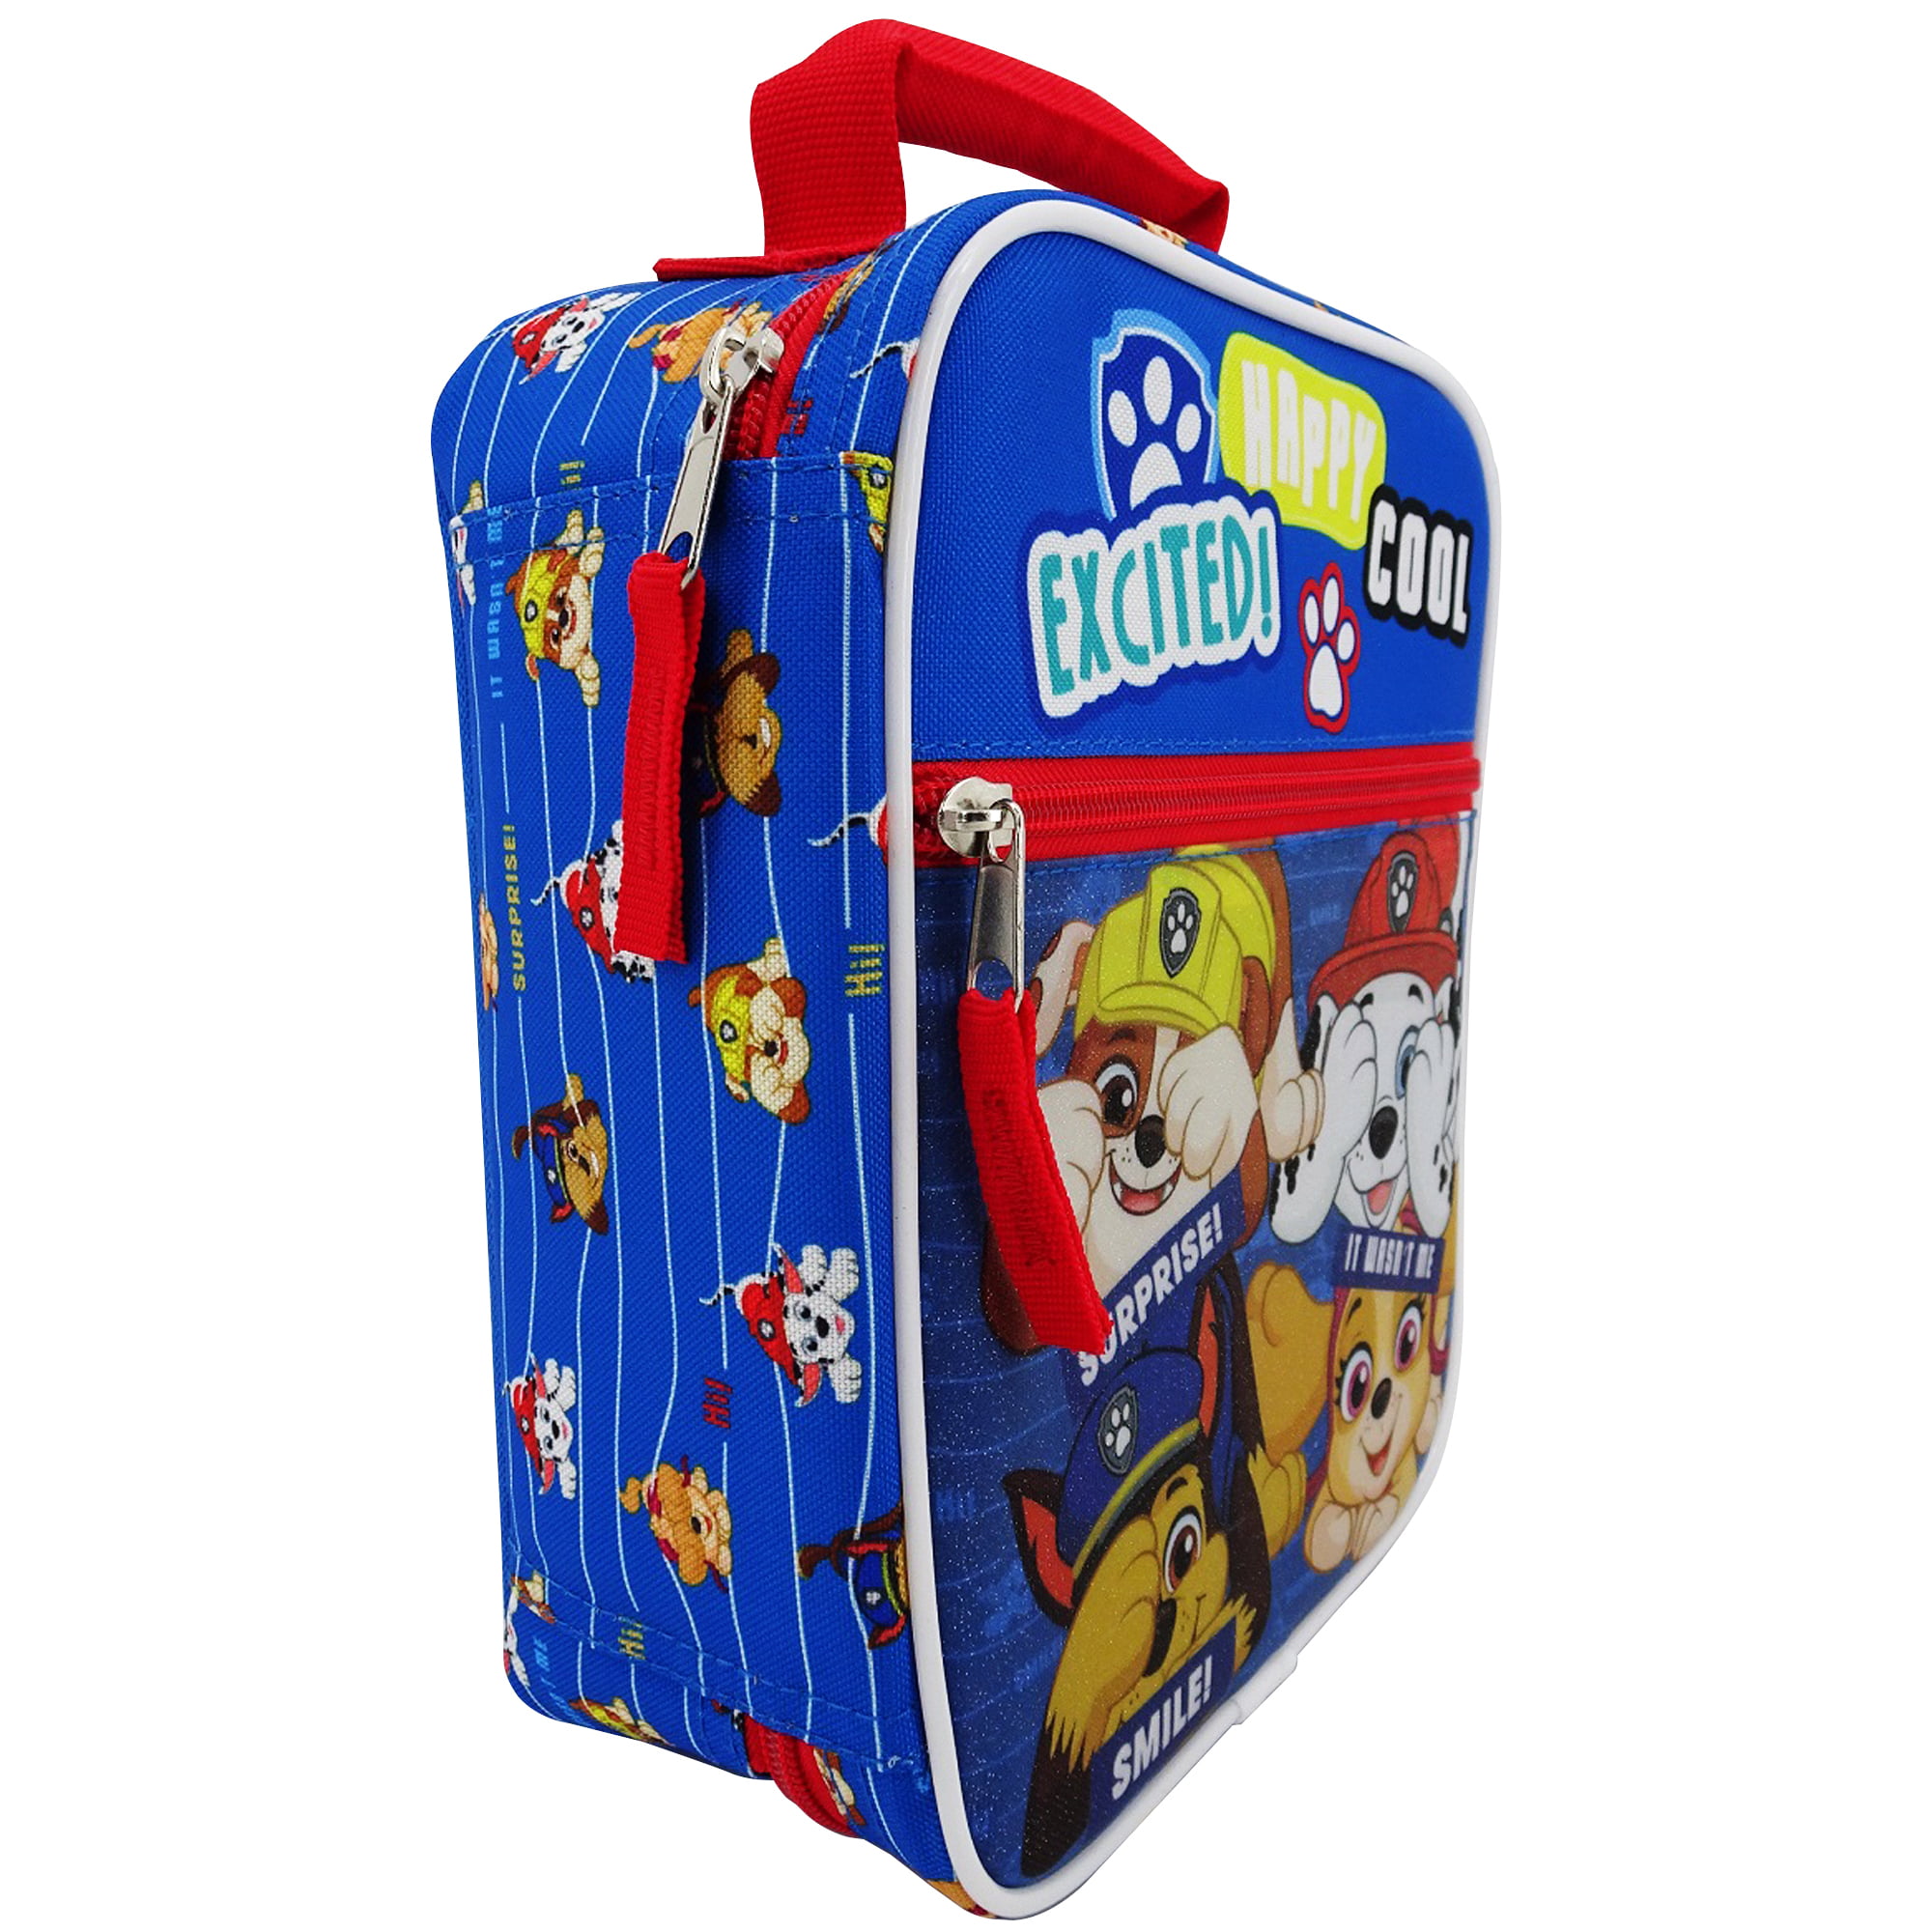 Nickelodeon Paw Patrol Lunch Box with Skye and Indonesia